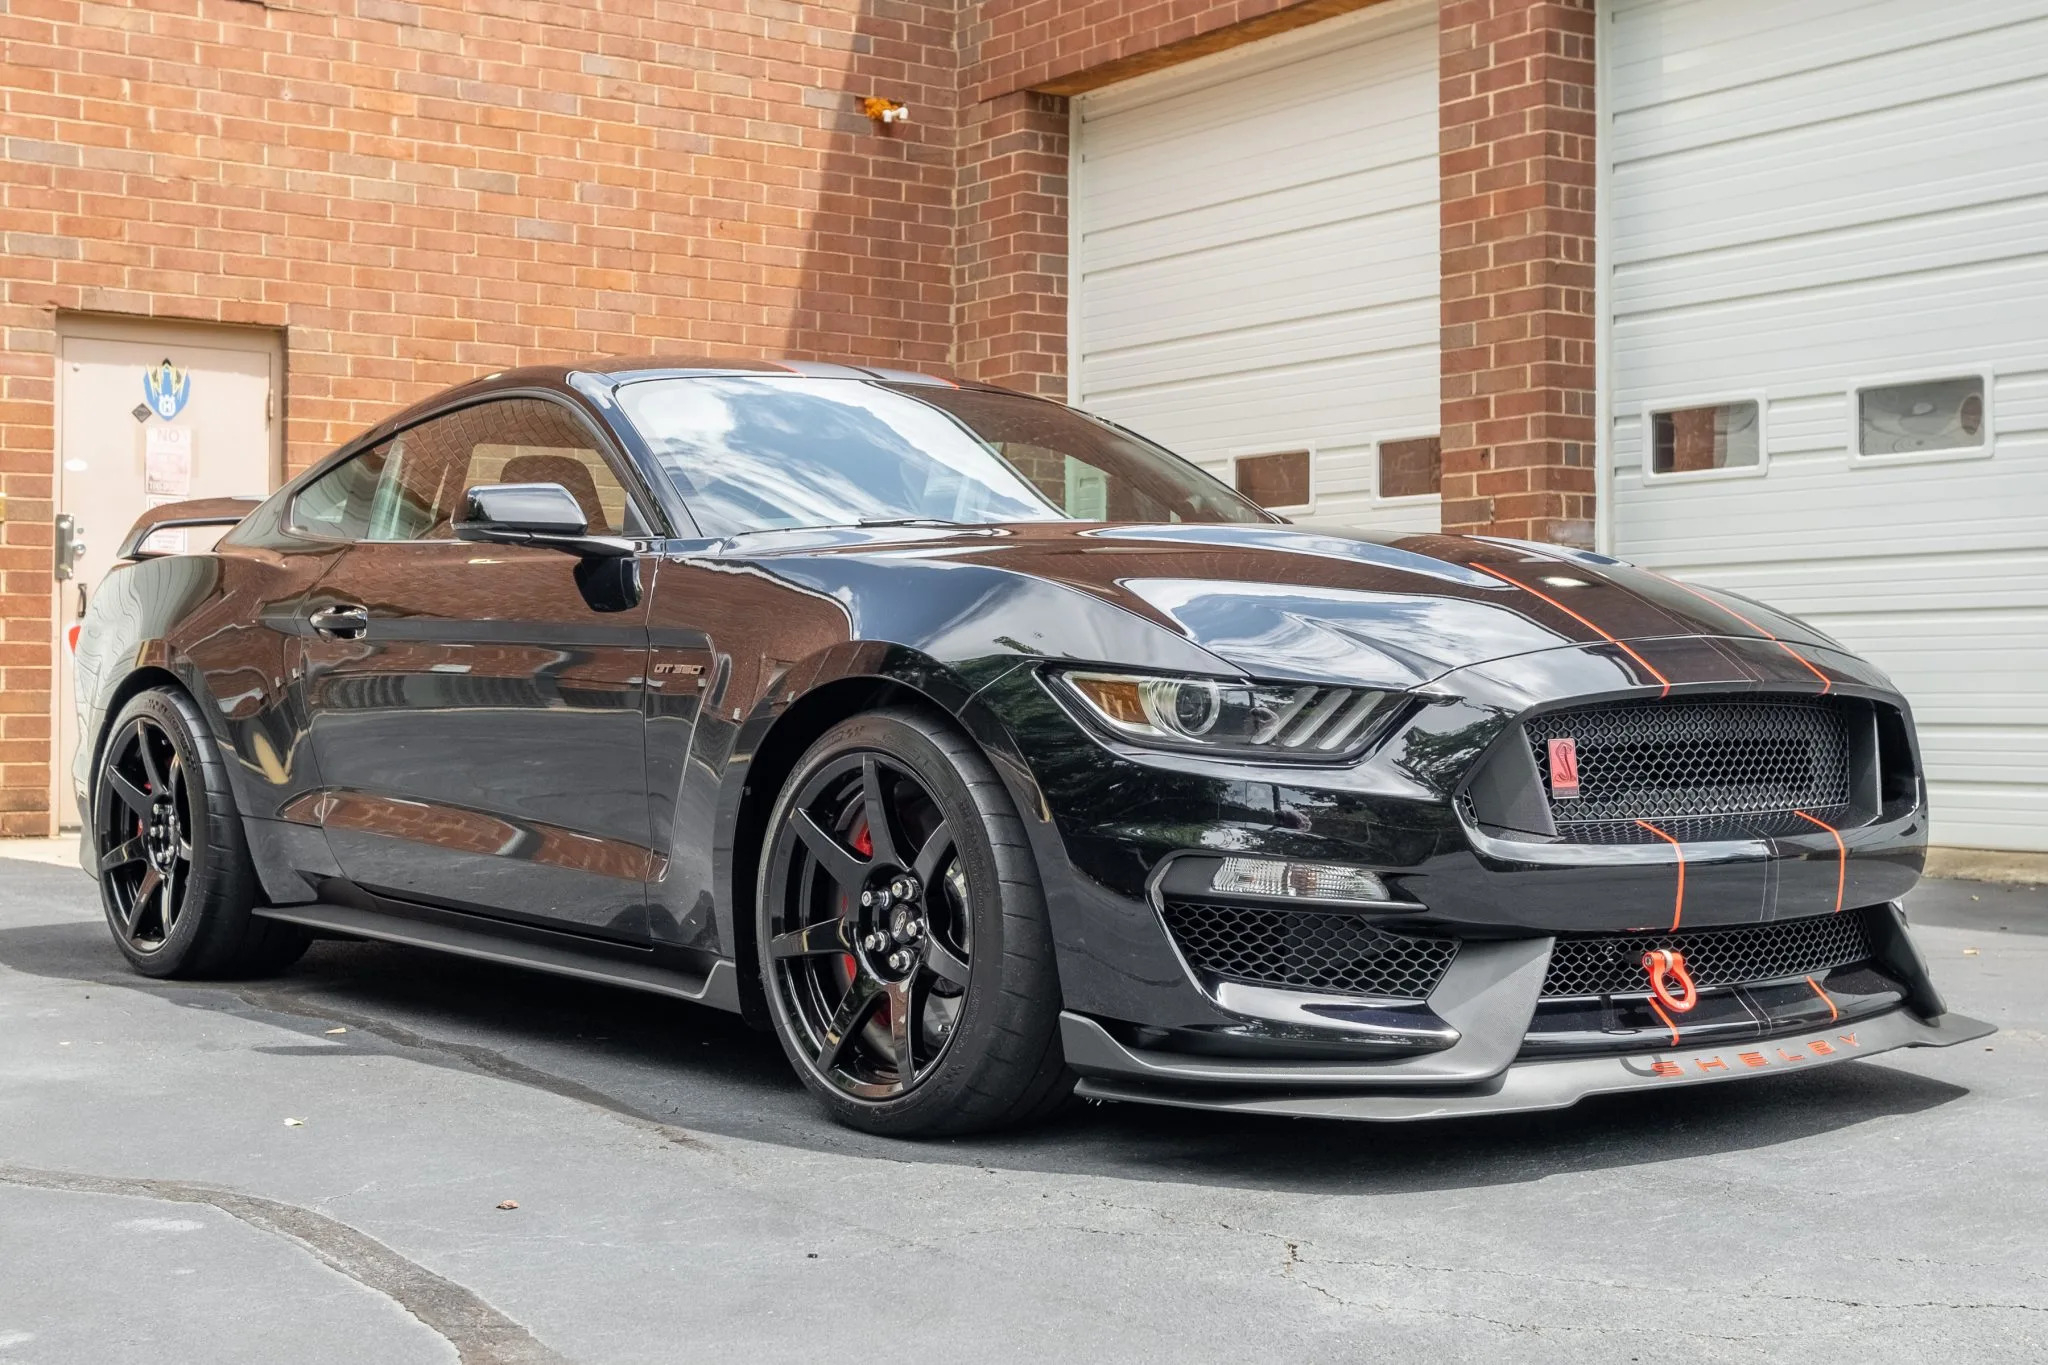 2019 Ford Mustang Shelby Gt350r Image Abyss 7996